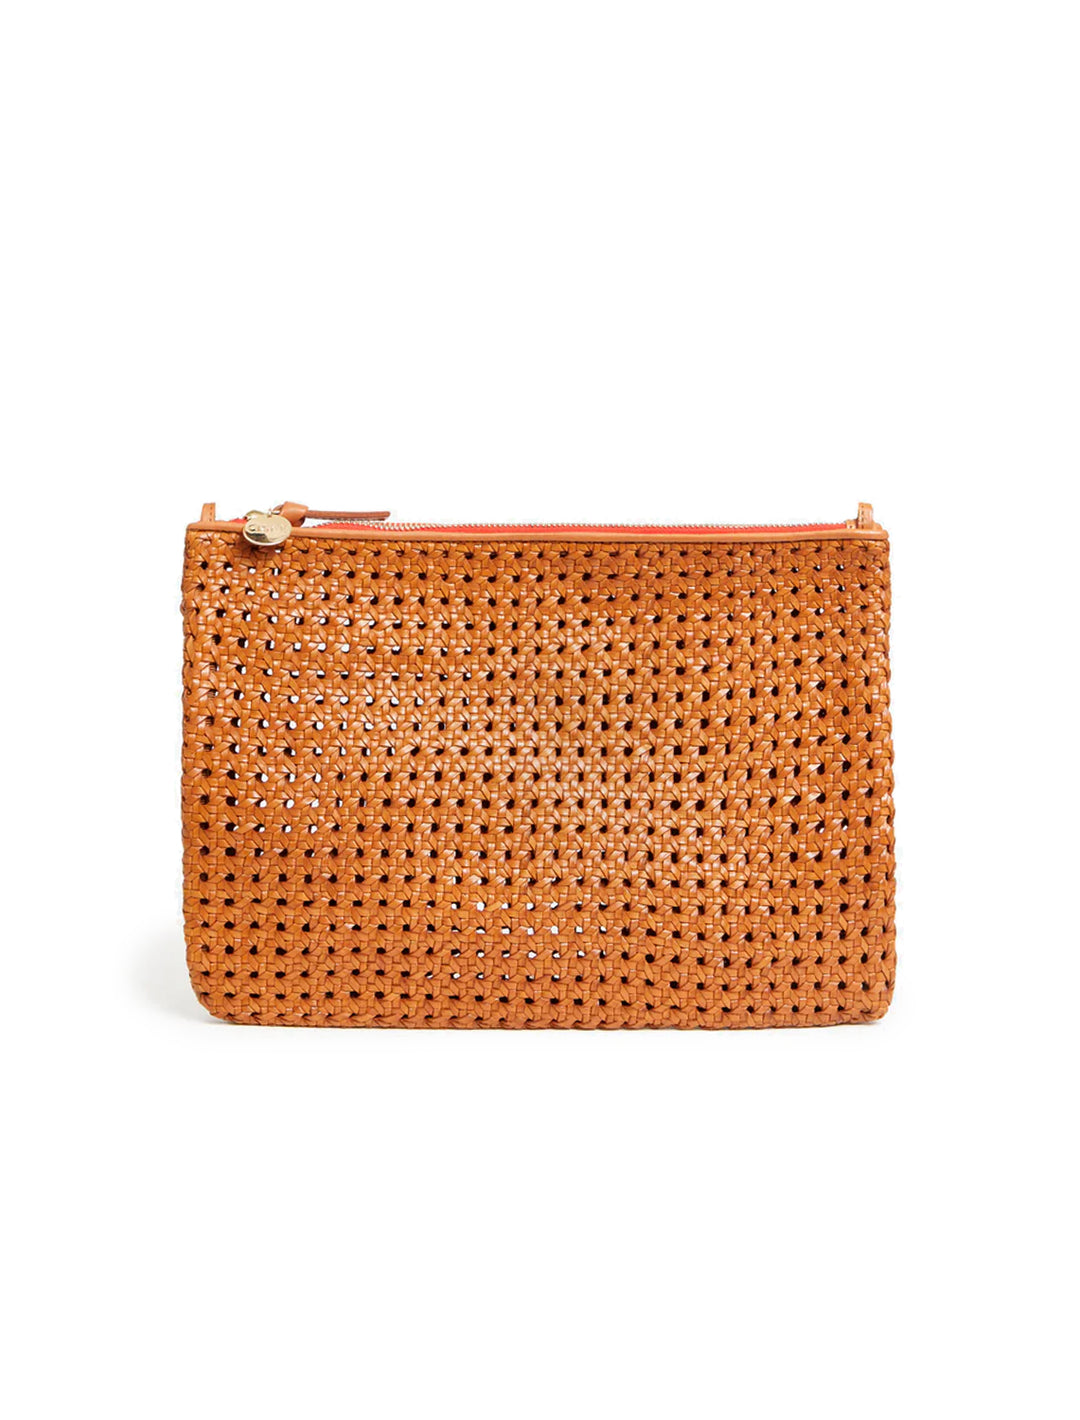 Clare V. - Flat Clutch with Tabs in Tan Rattan